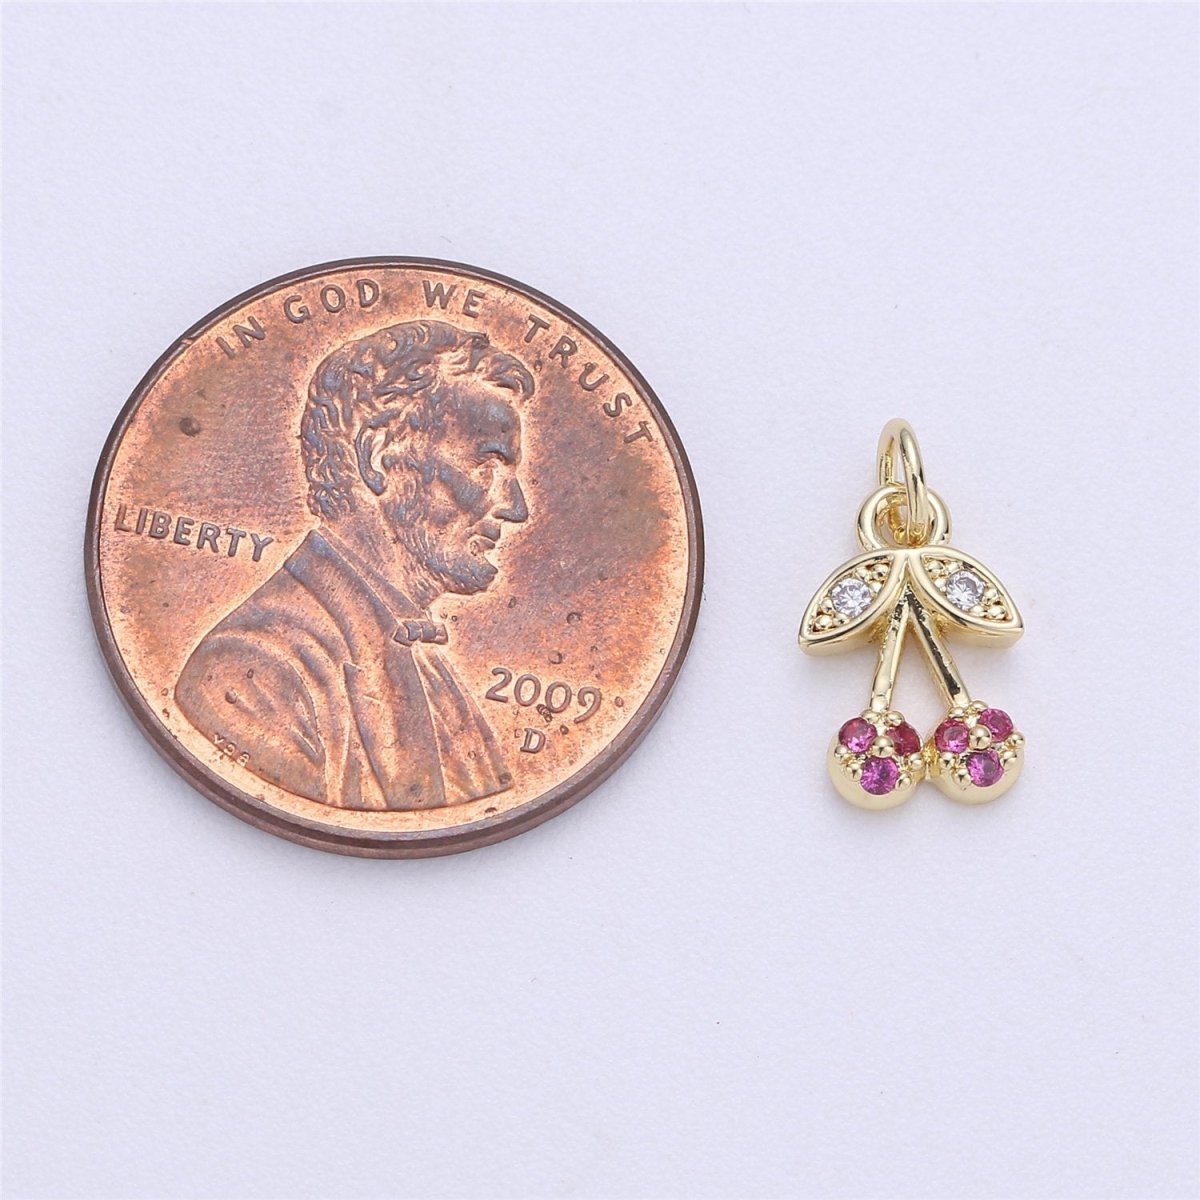 Dainty Tiny Teeny Delicate Red Cherry Charm in 18k Gold Filled for Necklace Pendant, Earring Bracelet Charm Gift DIY Jewelry Making SuppliesC-245 - DLUXCA